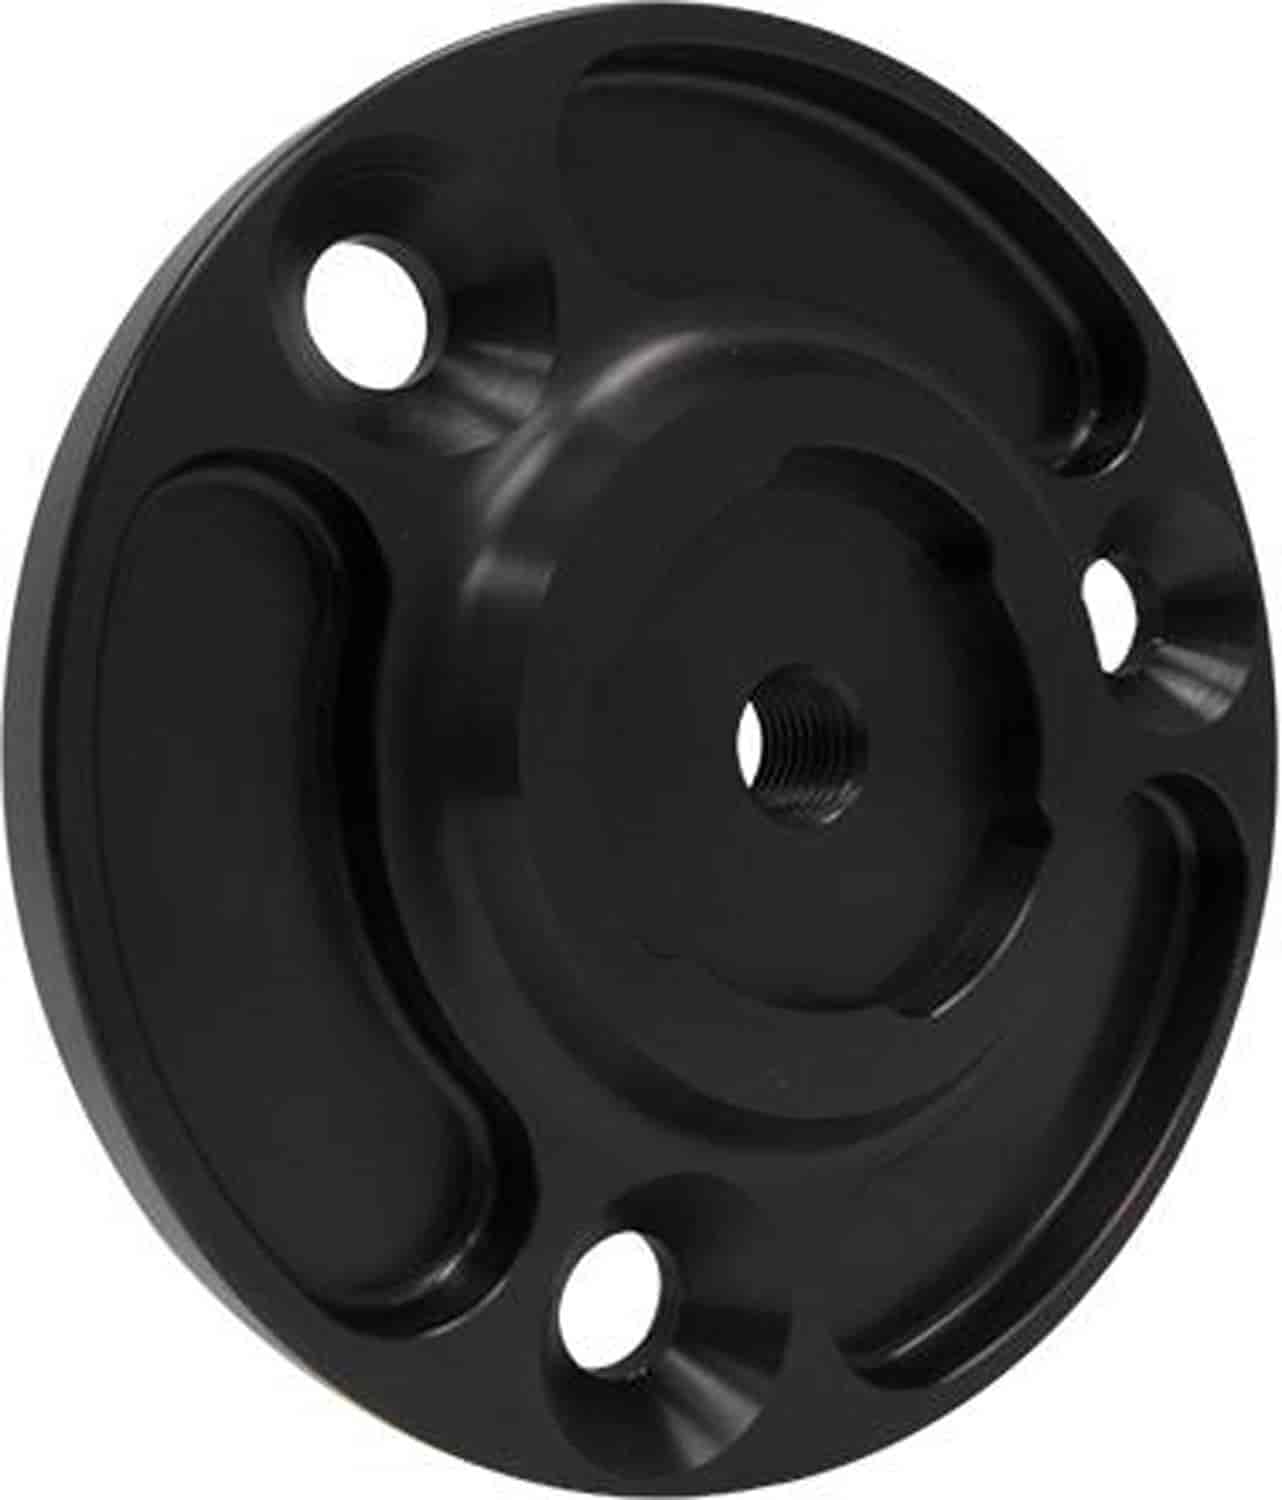 PRO R-LOK CRANK ADAPTER SB CHEVROLET 2 PIECE .620 LONG FOR USE WITH 3.5 V-BELT CRANK PULLEY